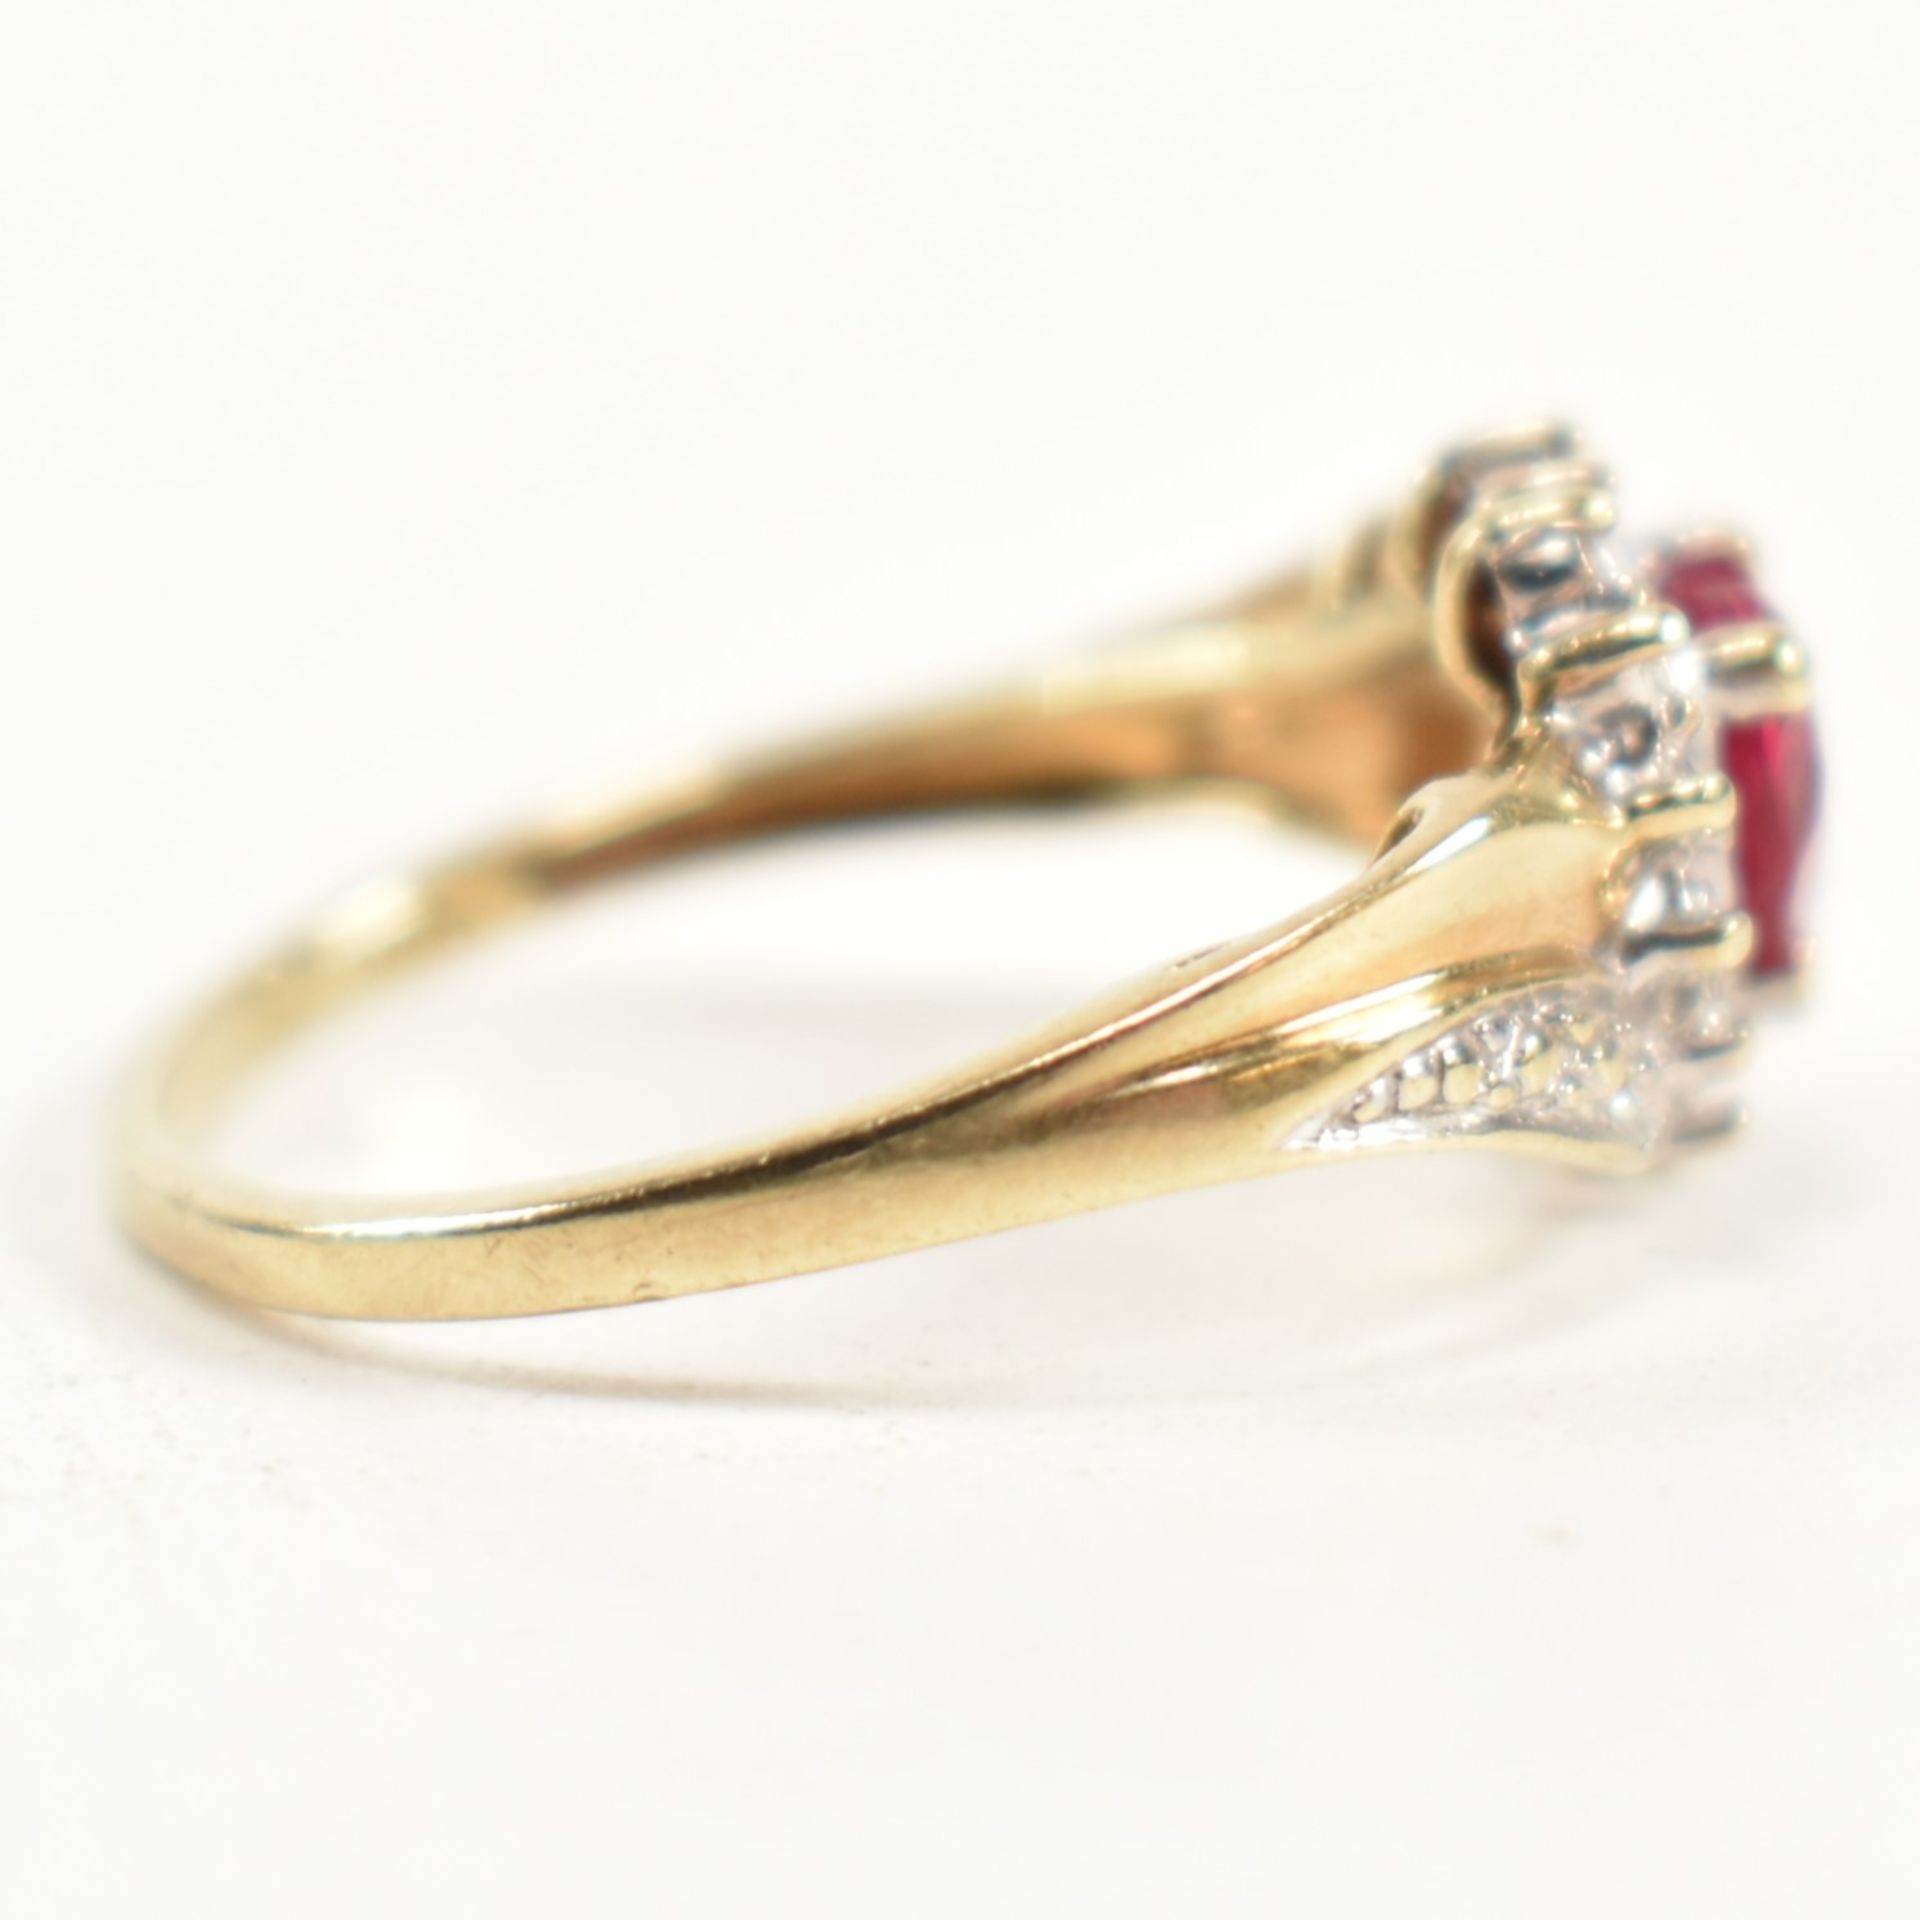 HALLMARKED 9CT GOLD DIAMOND & RUBY CLUSTER RING - Image 4 of 10